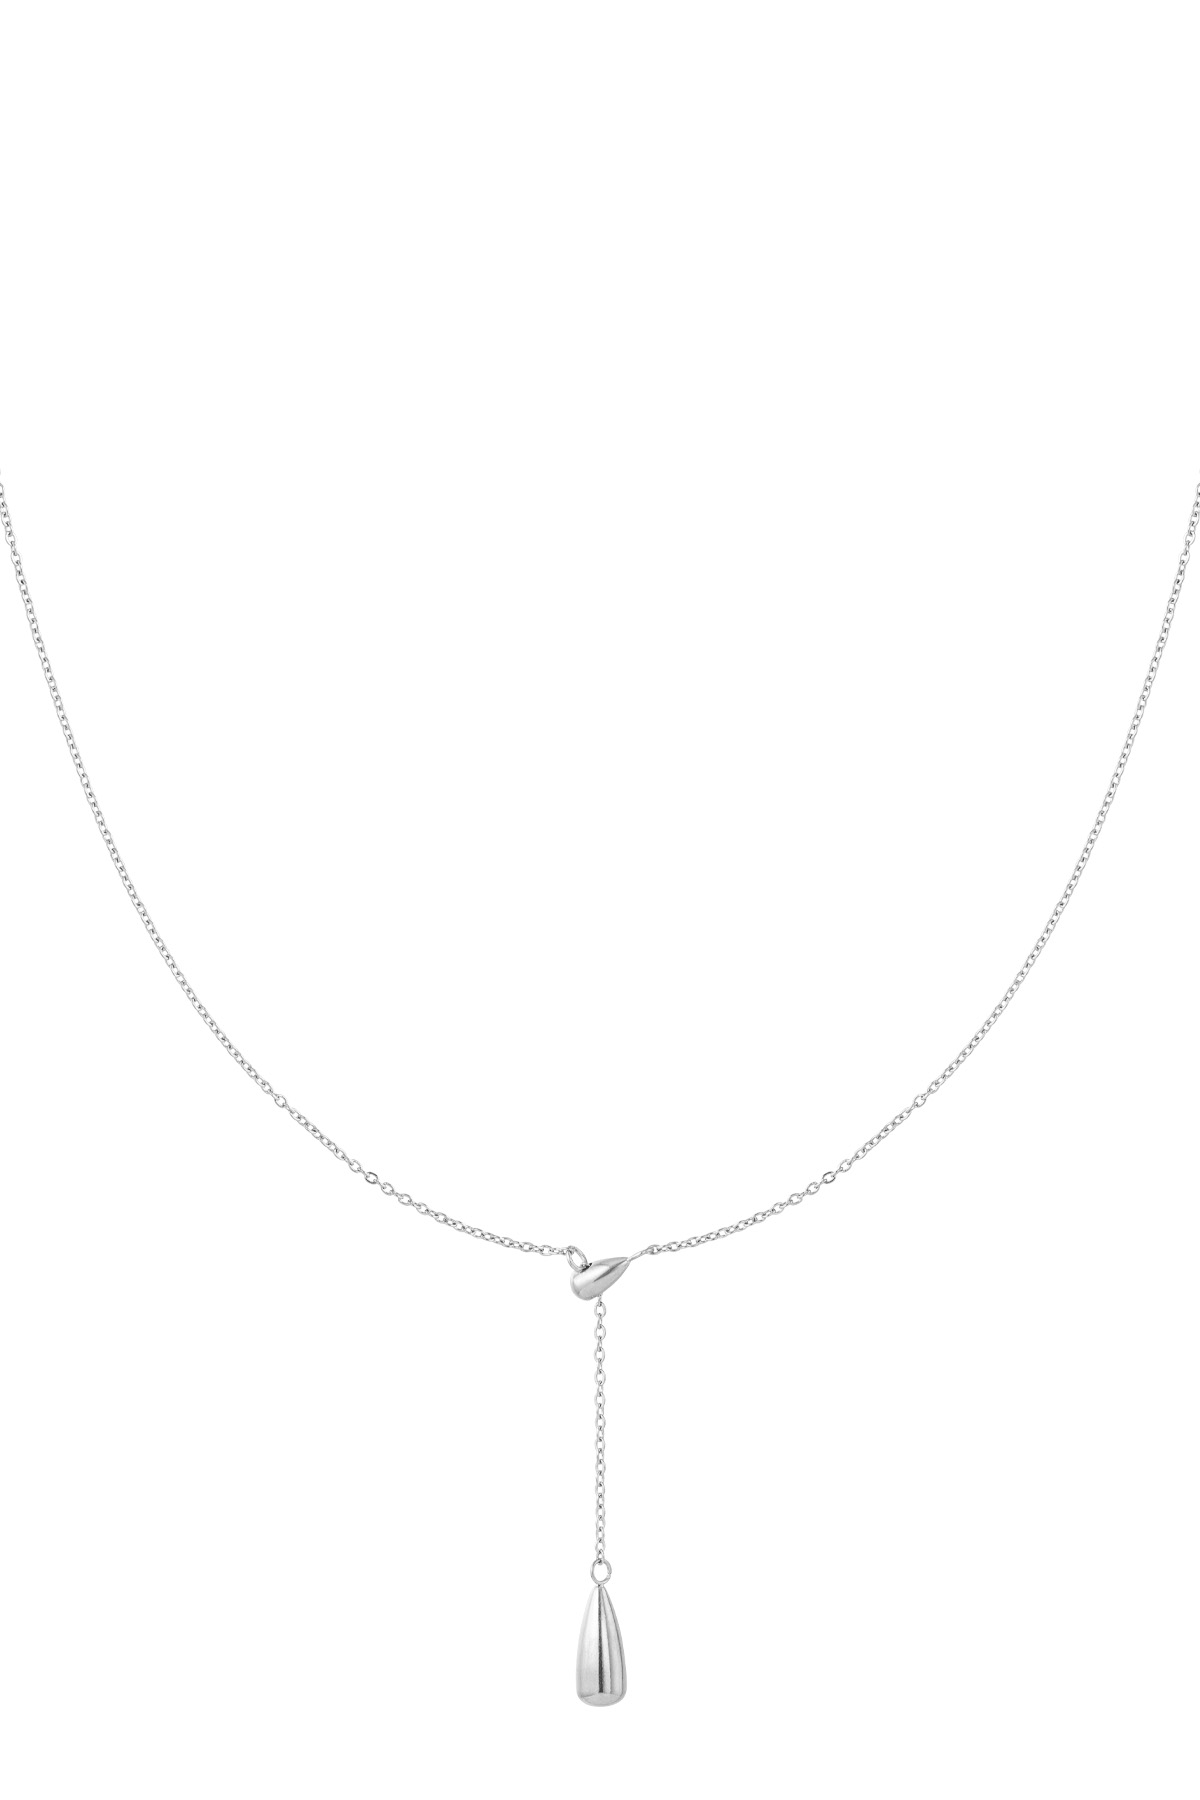 Necklace with drop charm - silver h5 